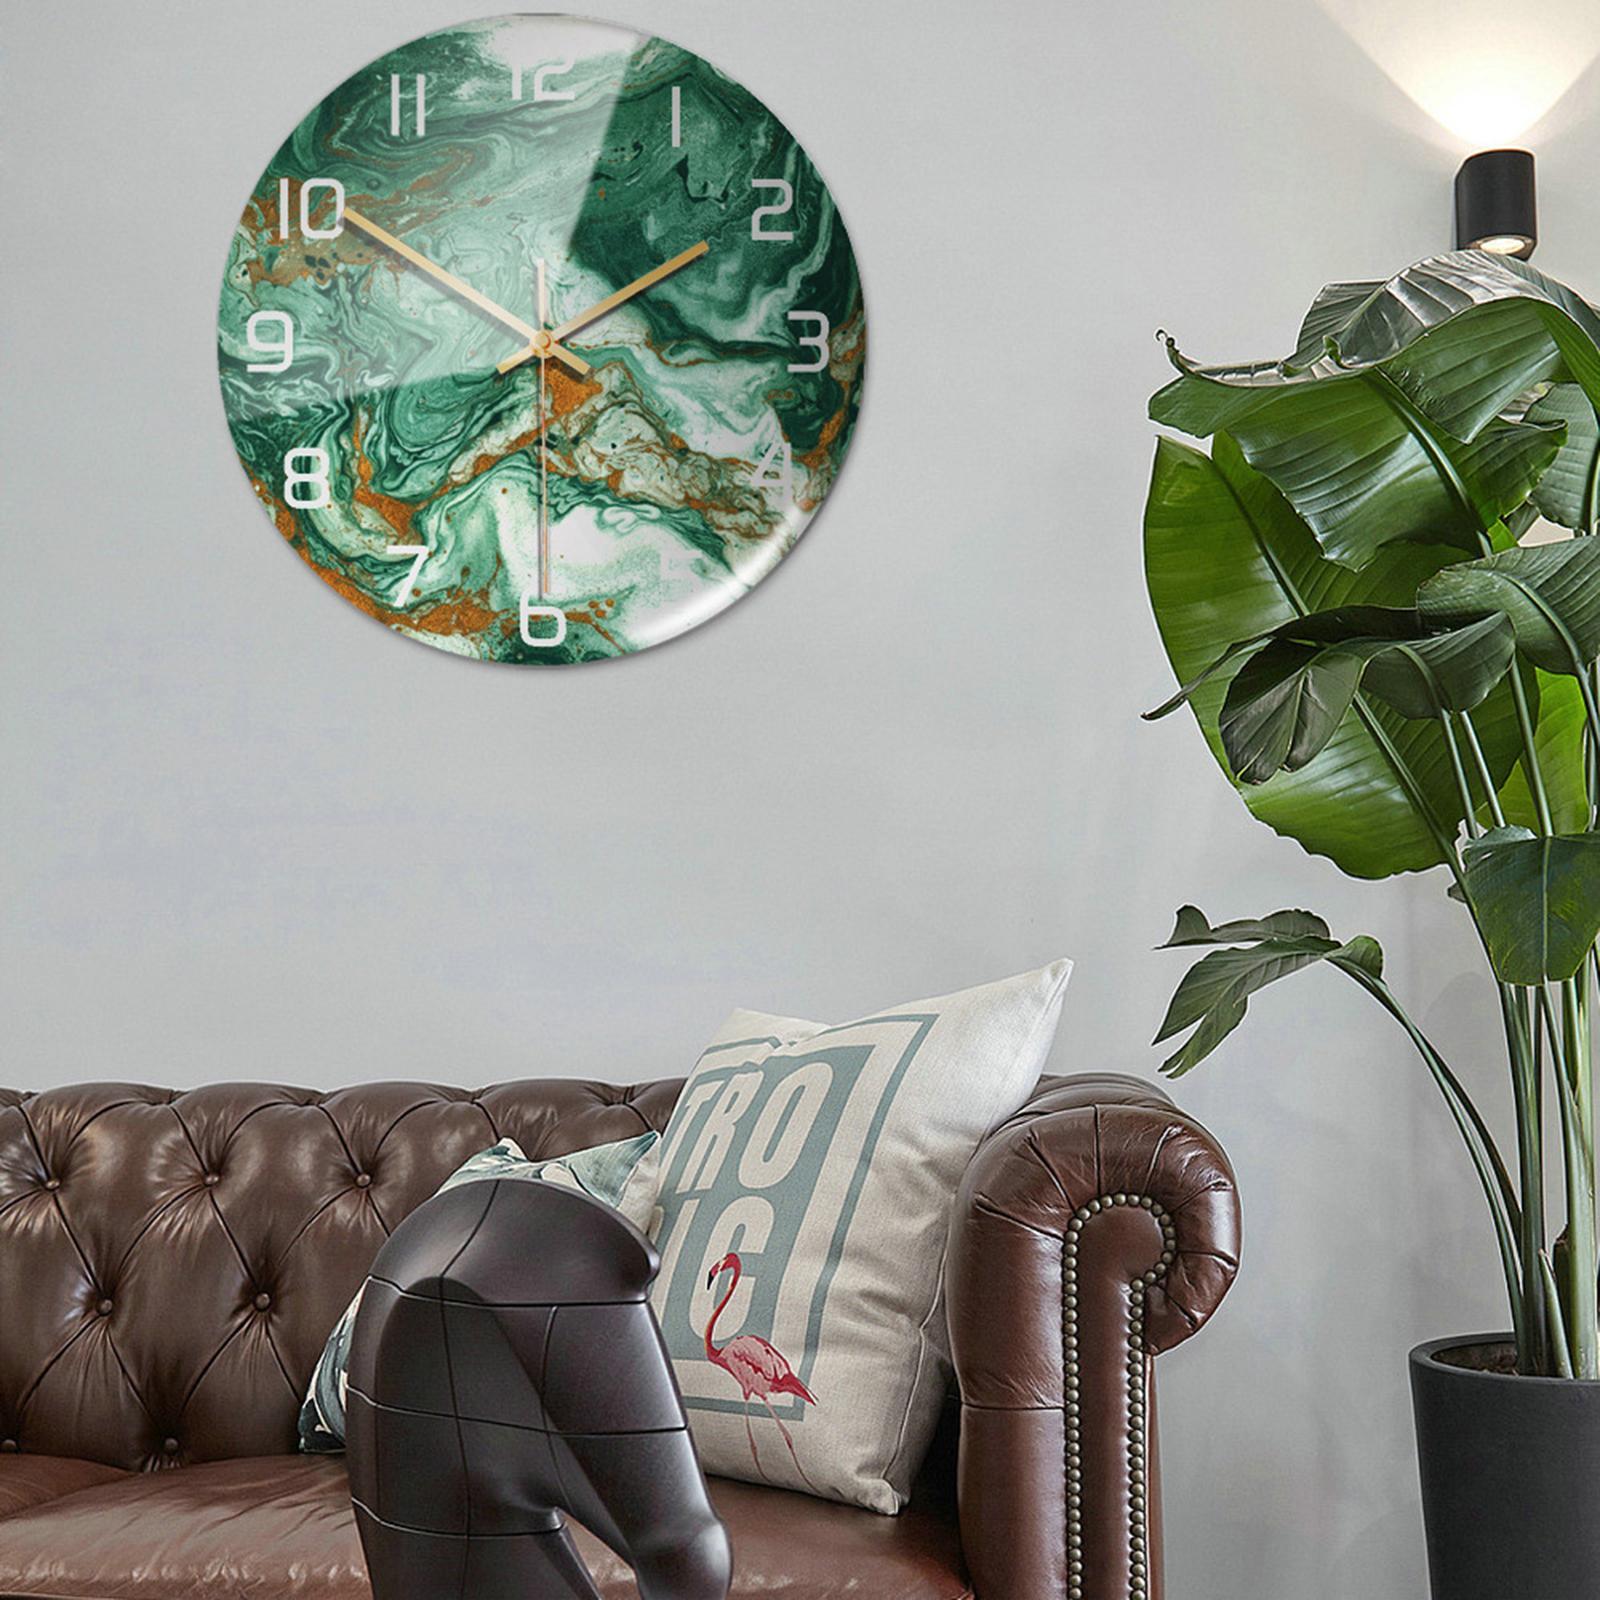 Acrylic Modern Wall Clock Non Ticking Round for Home Bedroom